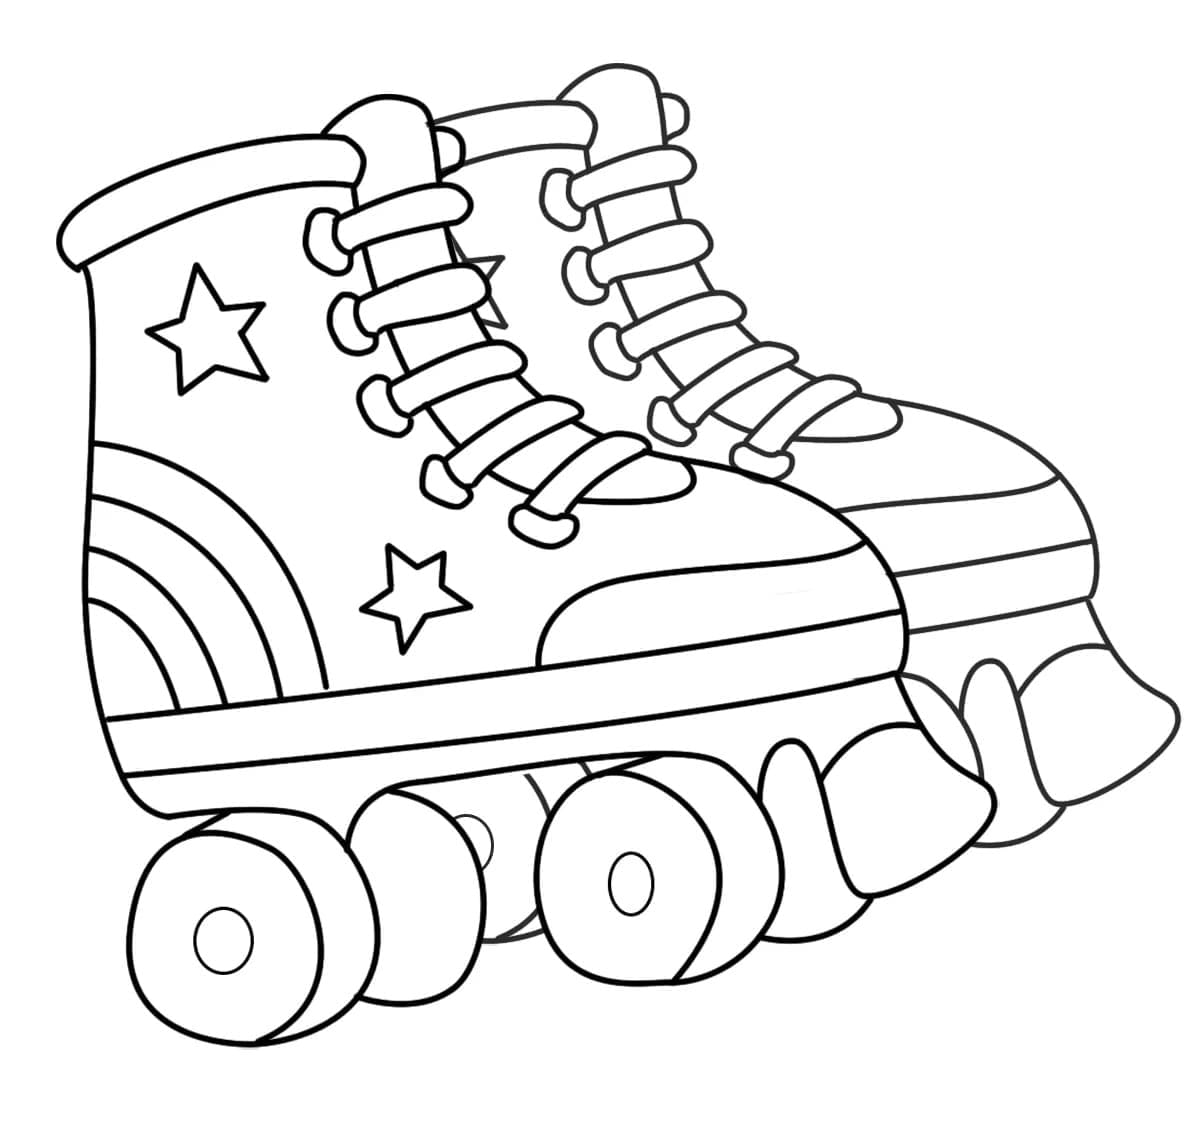 Retro Roller Skate coloring page